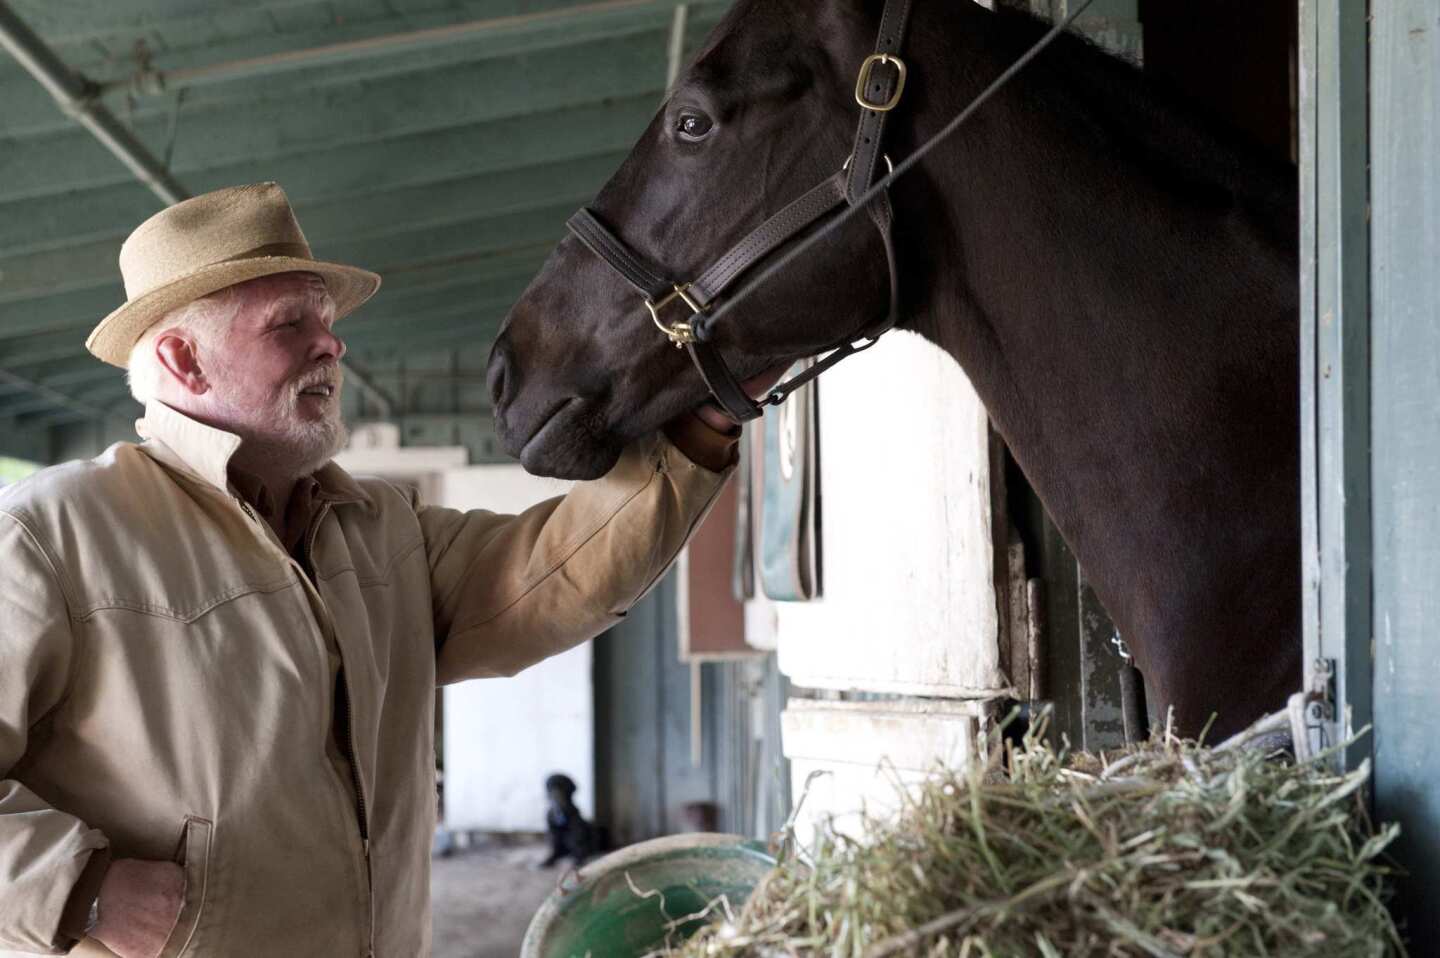 HBO's "Luck" shut down this week after the death of a third horse on the set fueled controversy over the treatment of the animals used in the production. The executive producers released a statement announcing the cancellation and added, "While we maintained the highest safety standards possible, accidents unfortunately happen and it is impossible to guarantee they won't in the future."